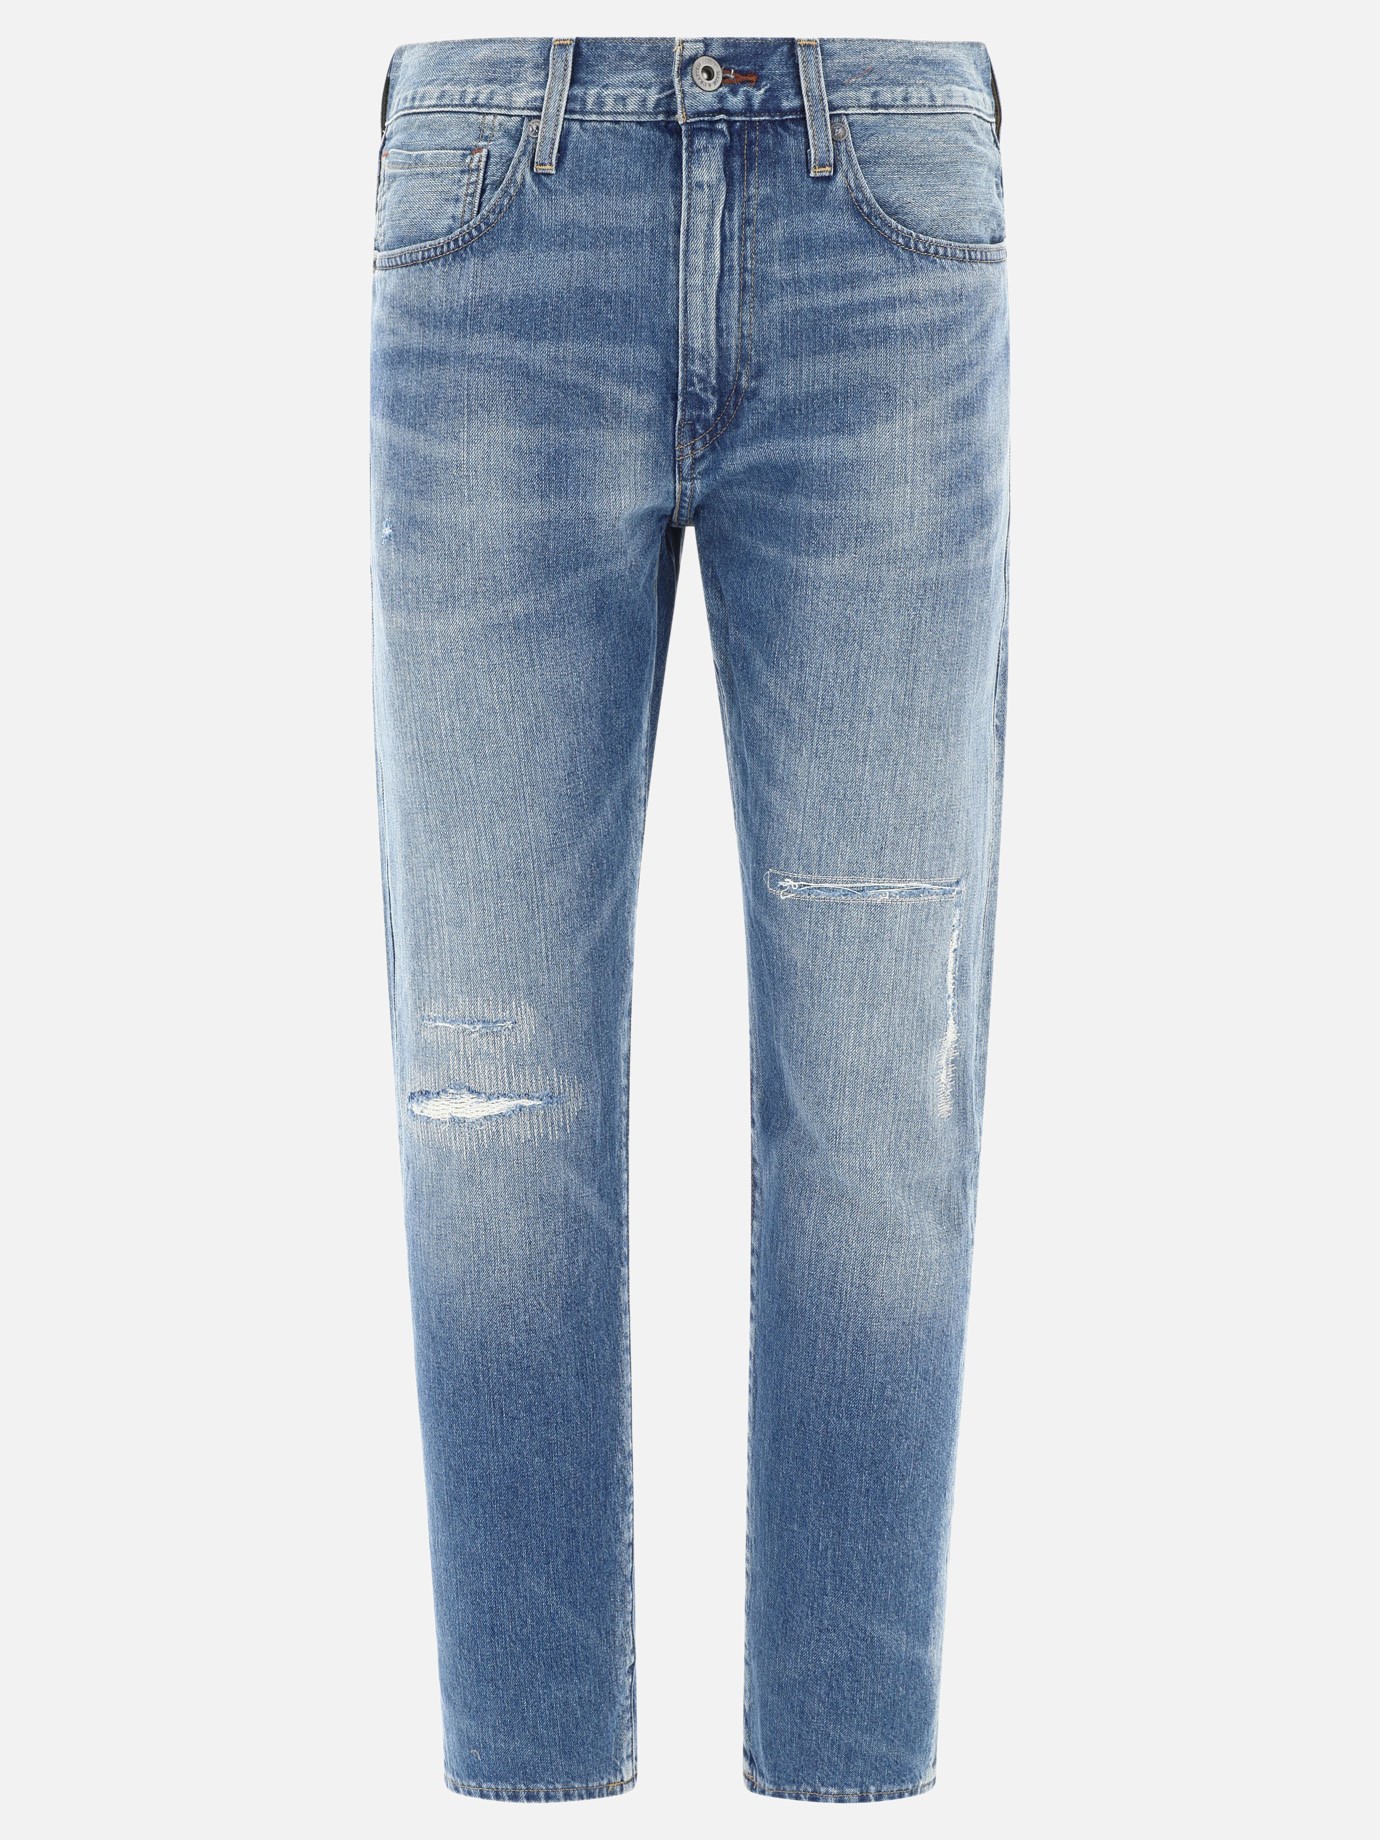 Jeans  502 Taper by Levi's Made & Crafted - 0